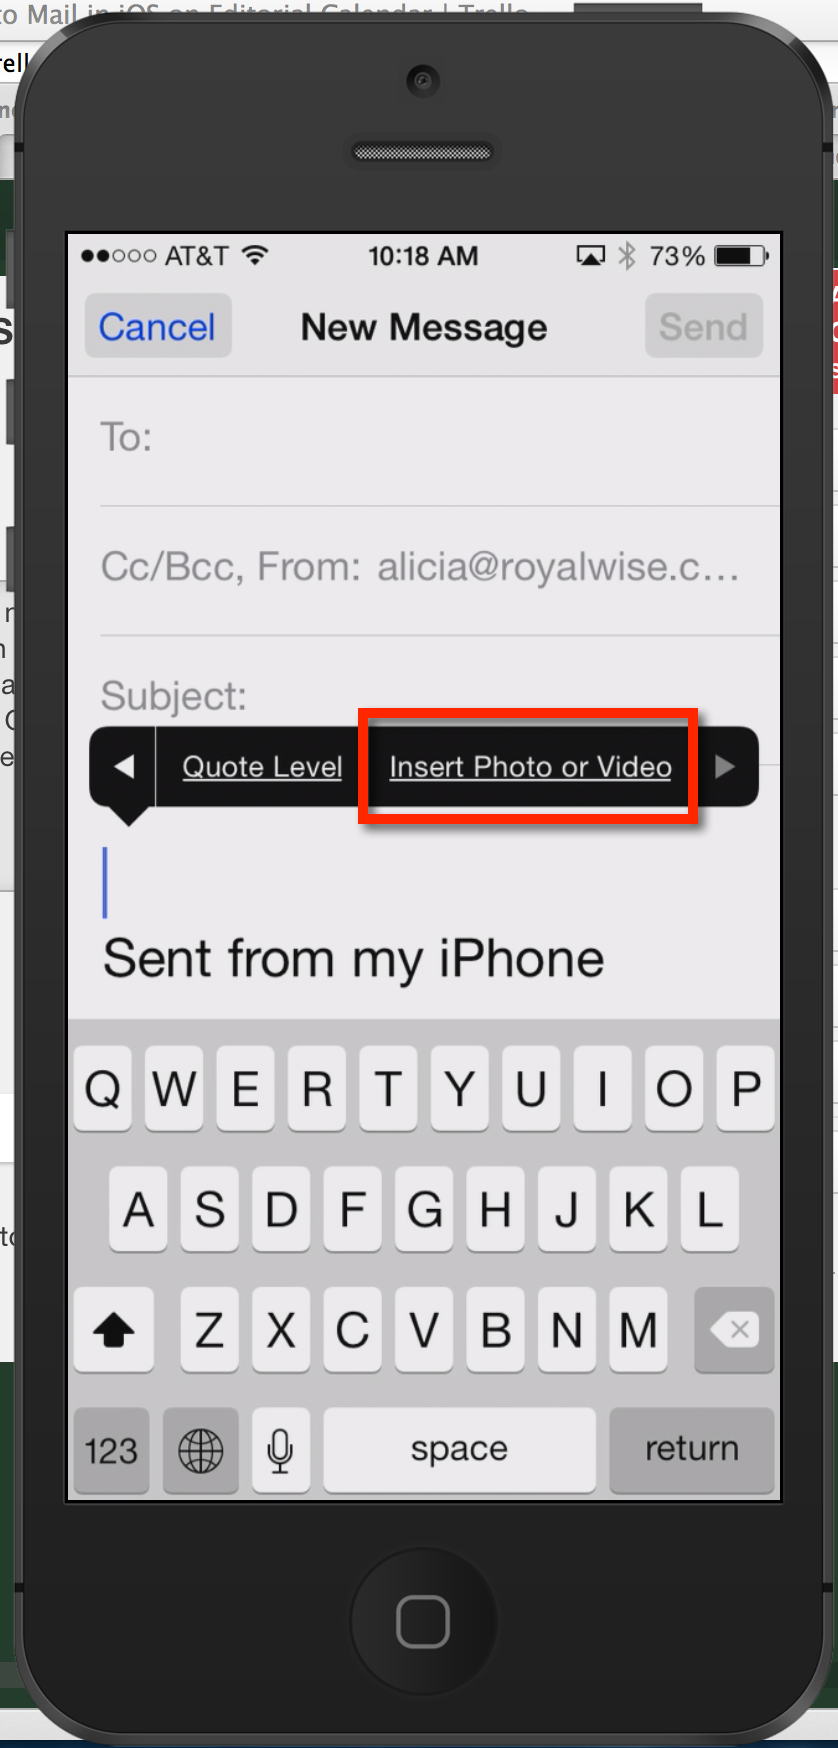 insert photo in Mail on iPhone or iPad